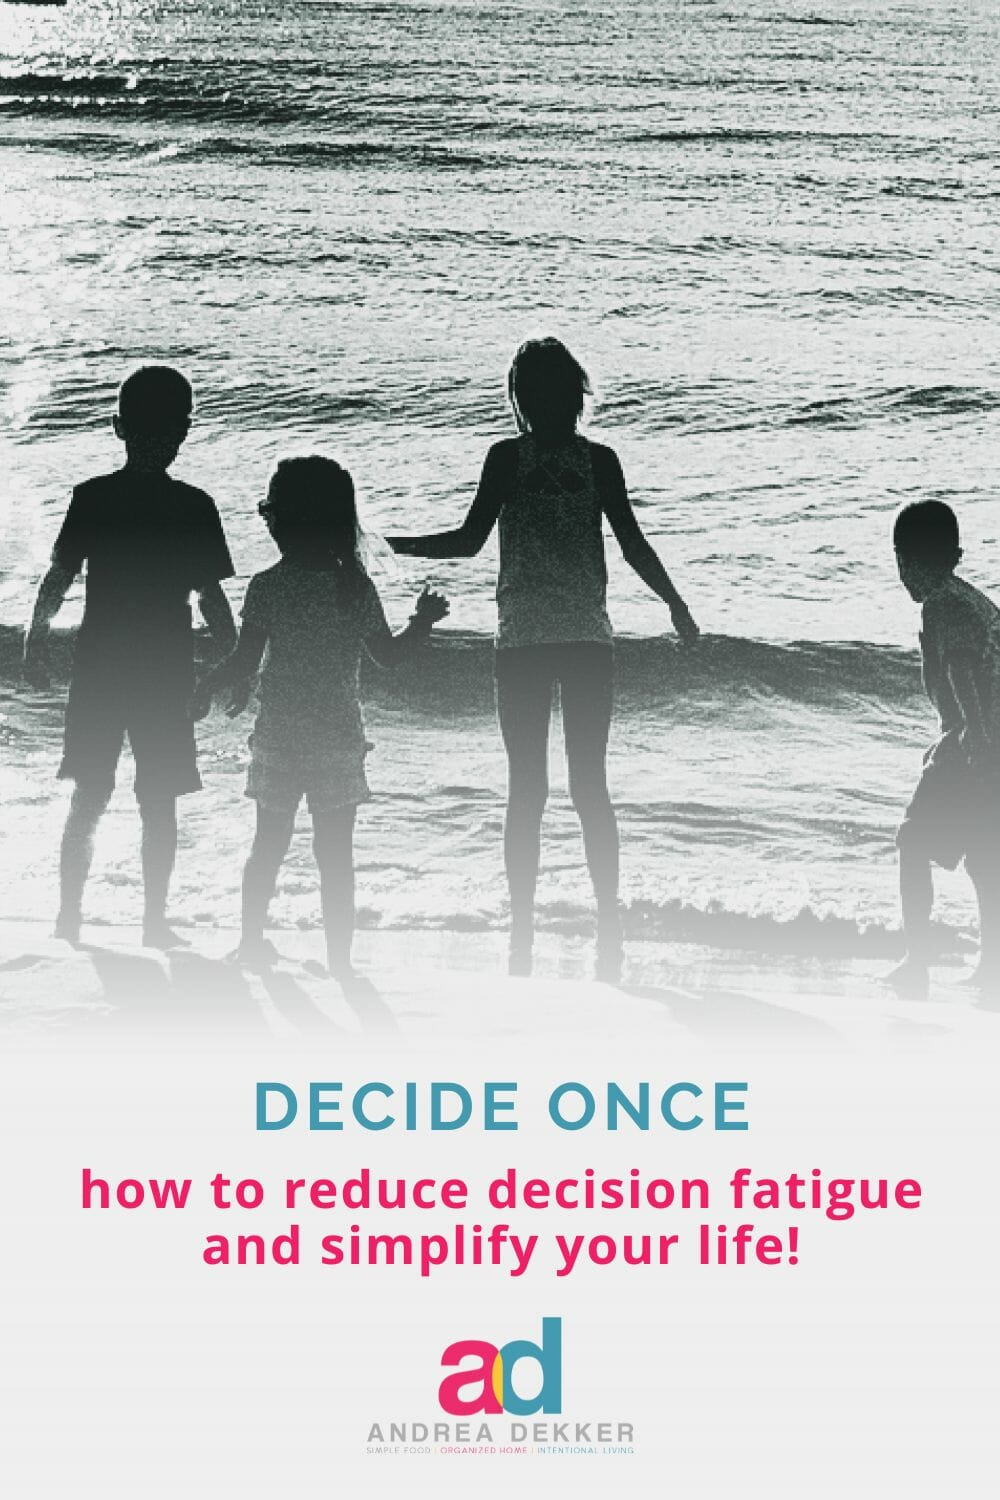 Do you dread meal planning? Are you drowning in dirty laundry? Are mornings chaotic and stressful for your family? Let me show you how "deciding once" helps to reduce decision fatigue and simplify my home and life! via @andreadekker